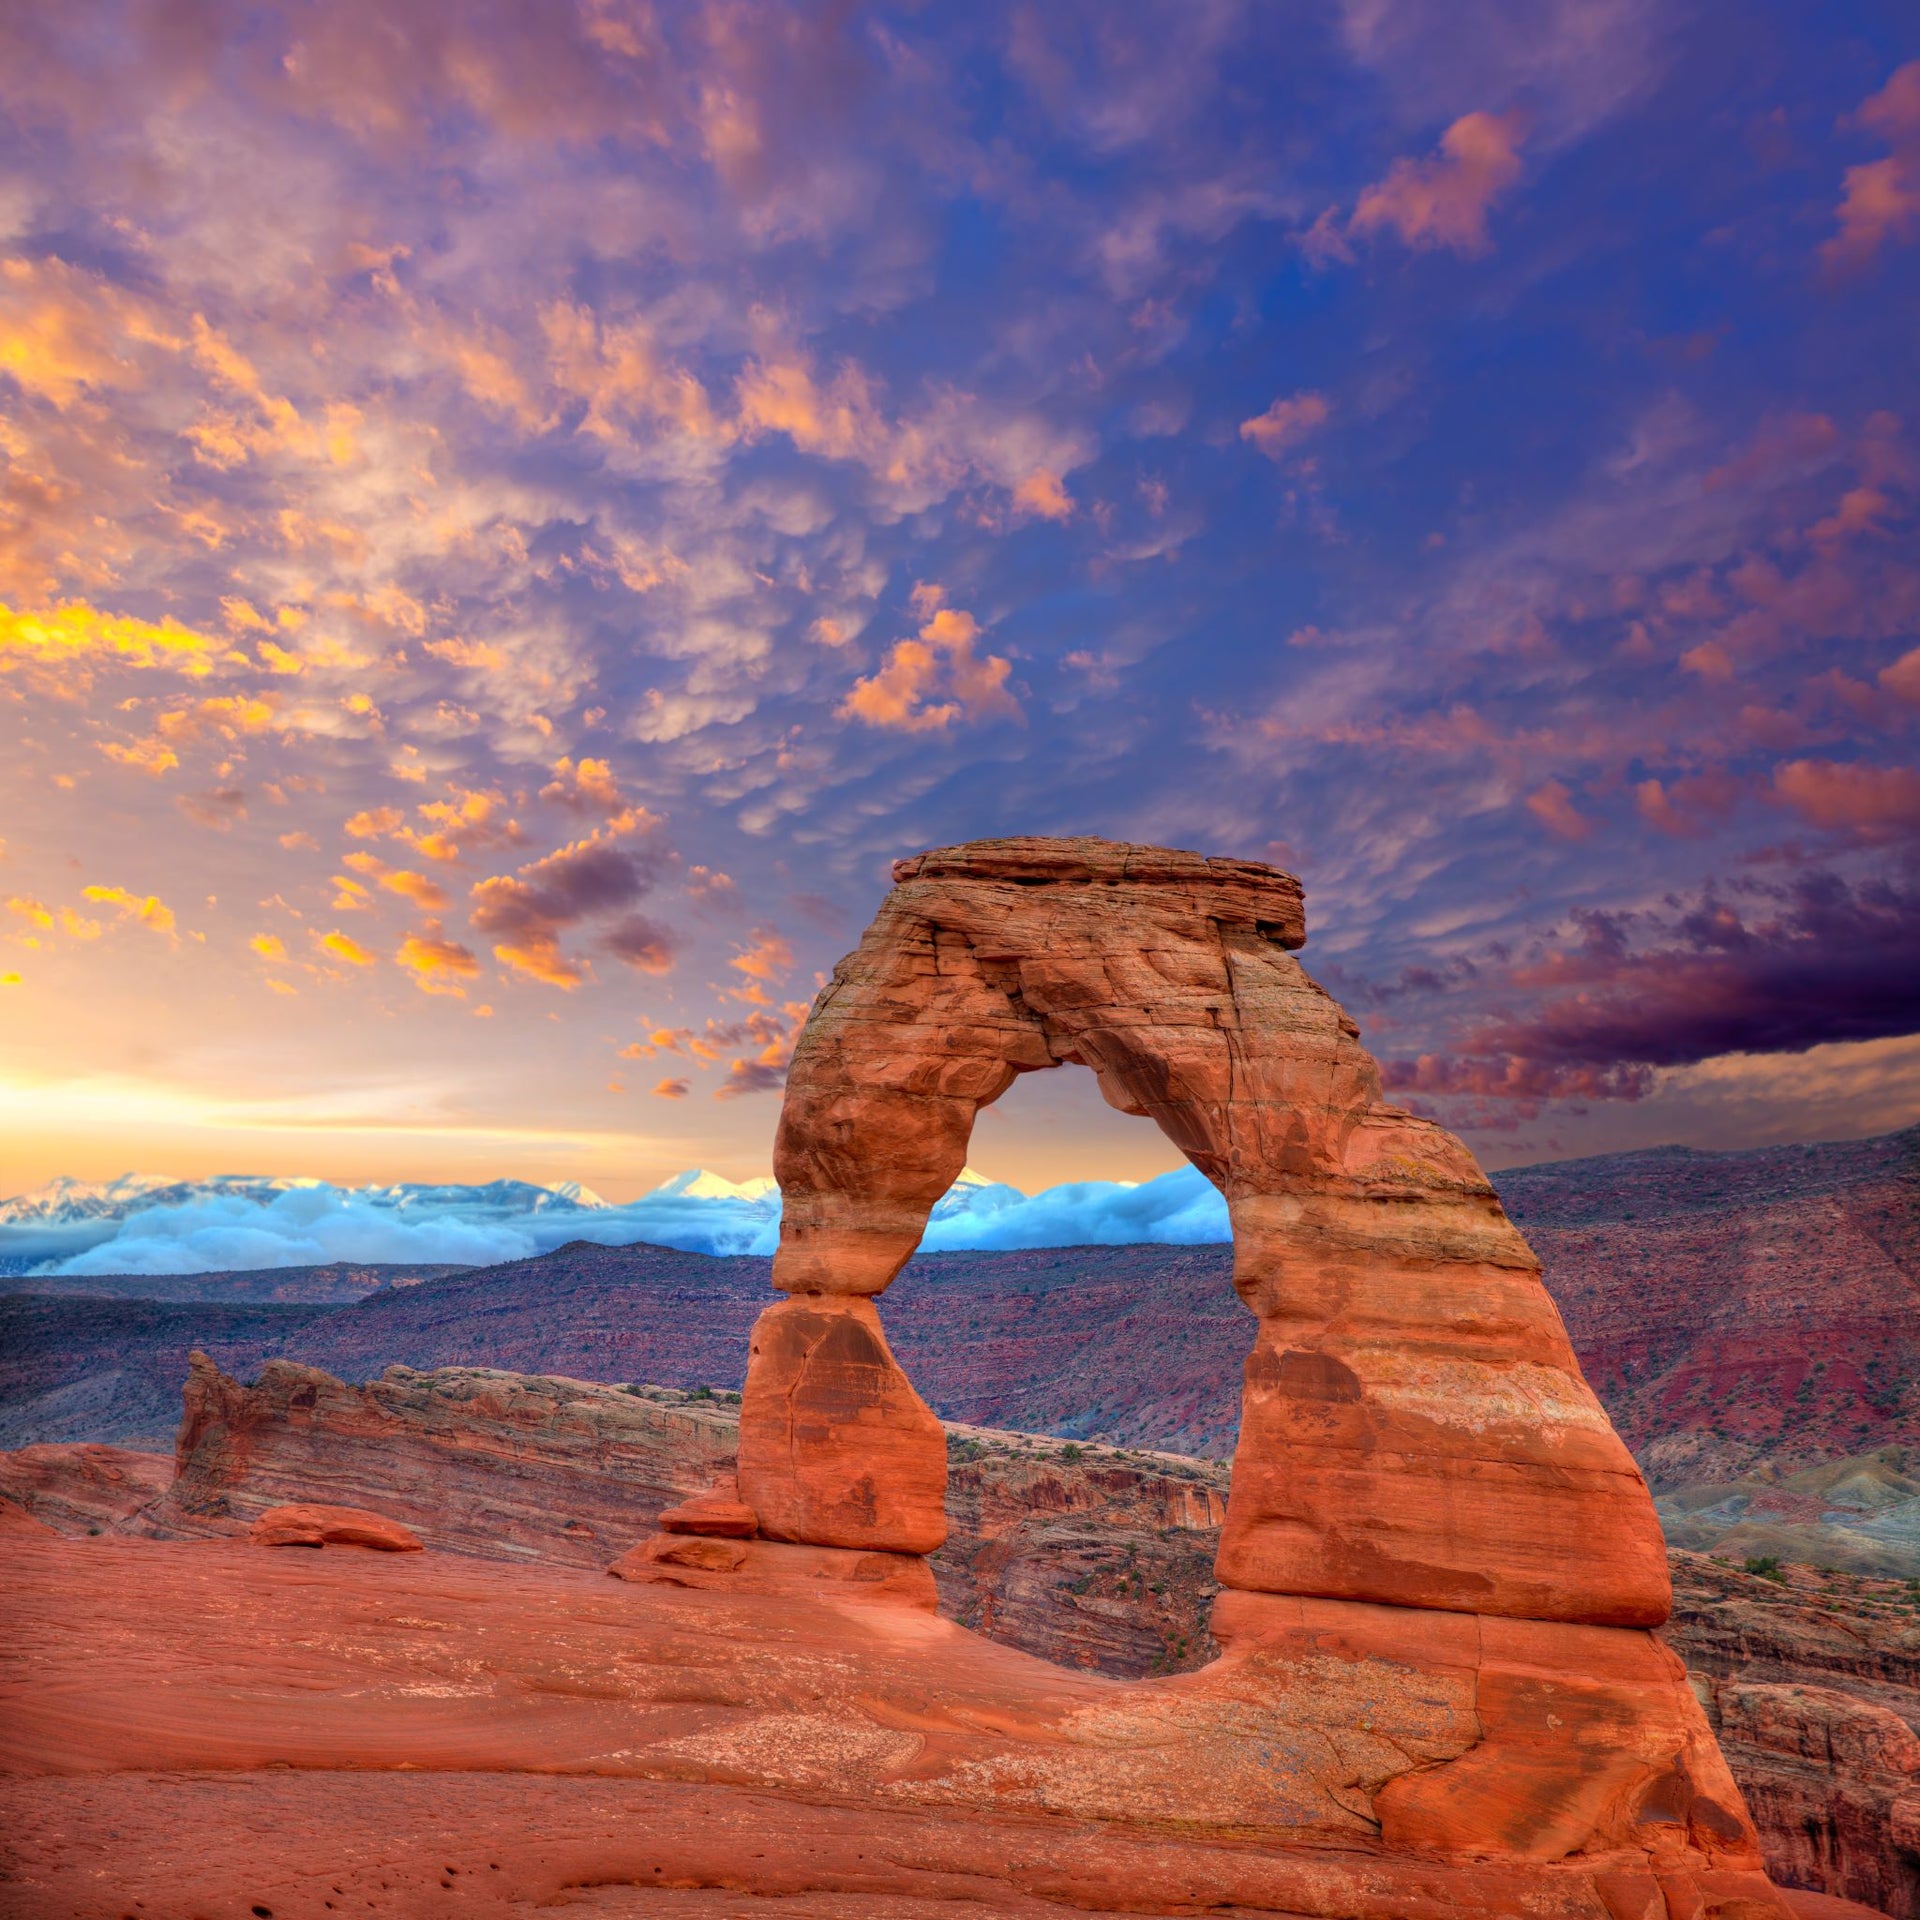 Sunset at Arches National Park - Crosscountrycreations